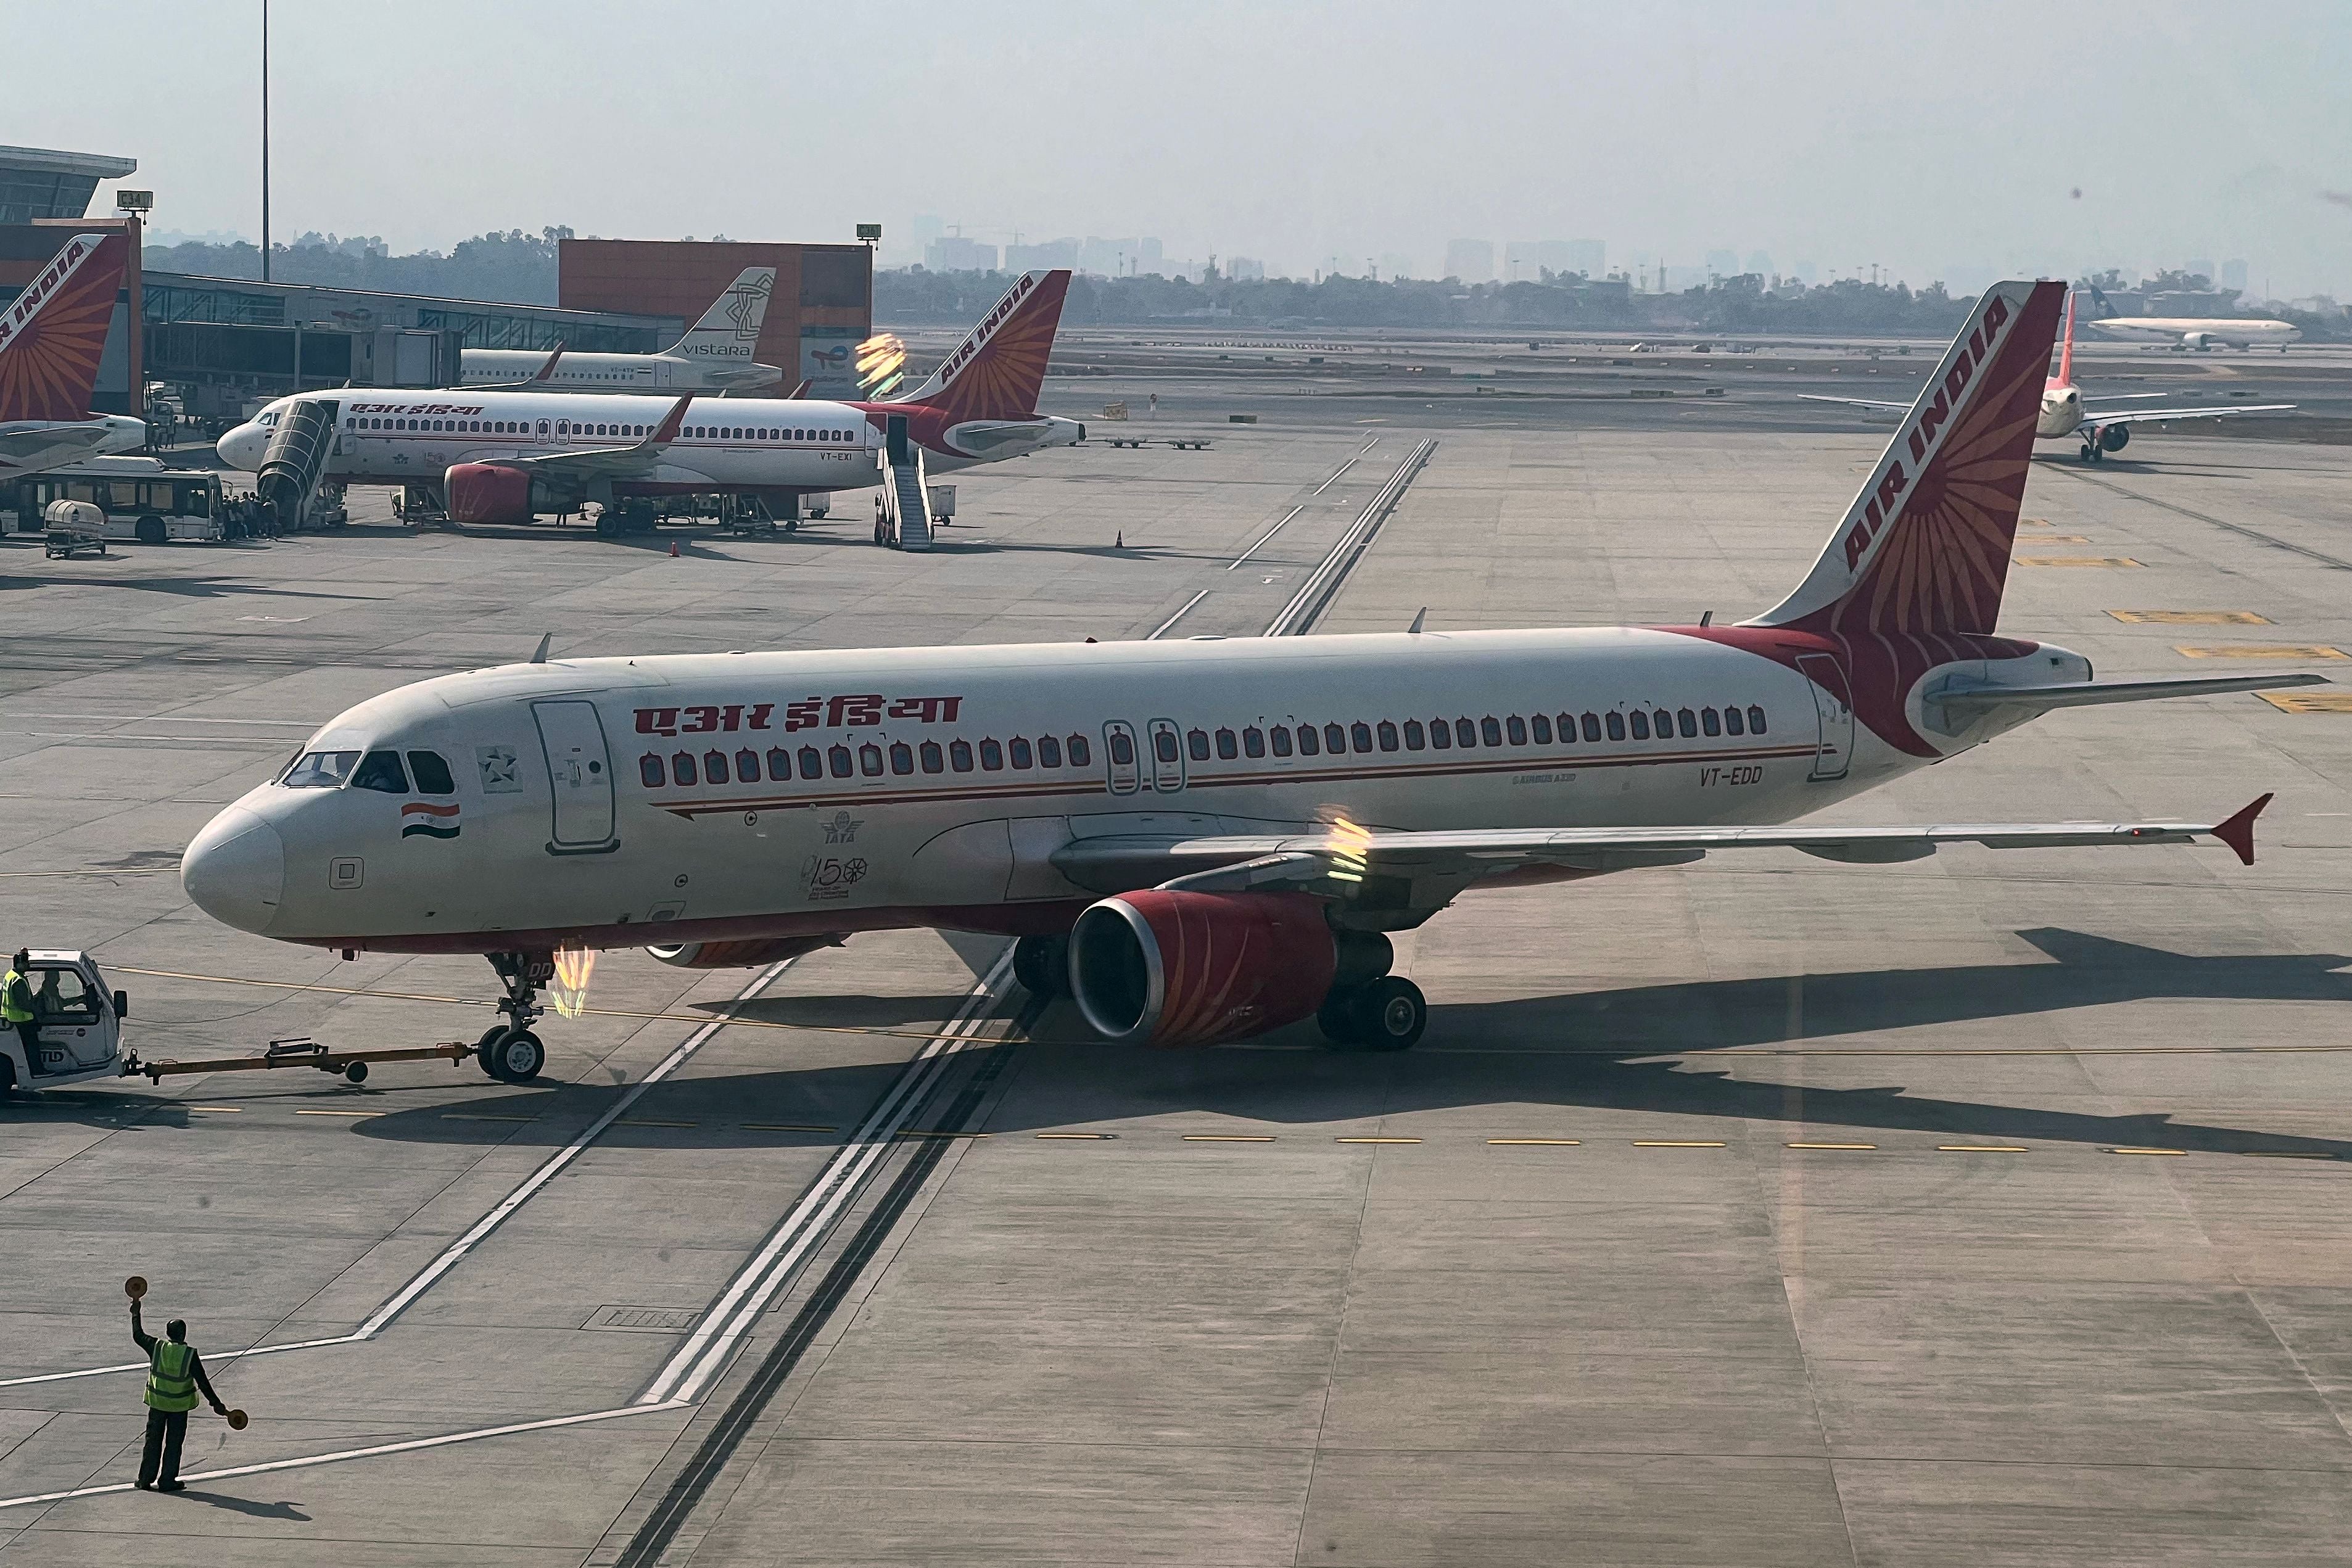 An Air India aircraft on the tarmac at the Indira Gandhi international airport in New Delhi on 20 January